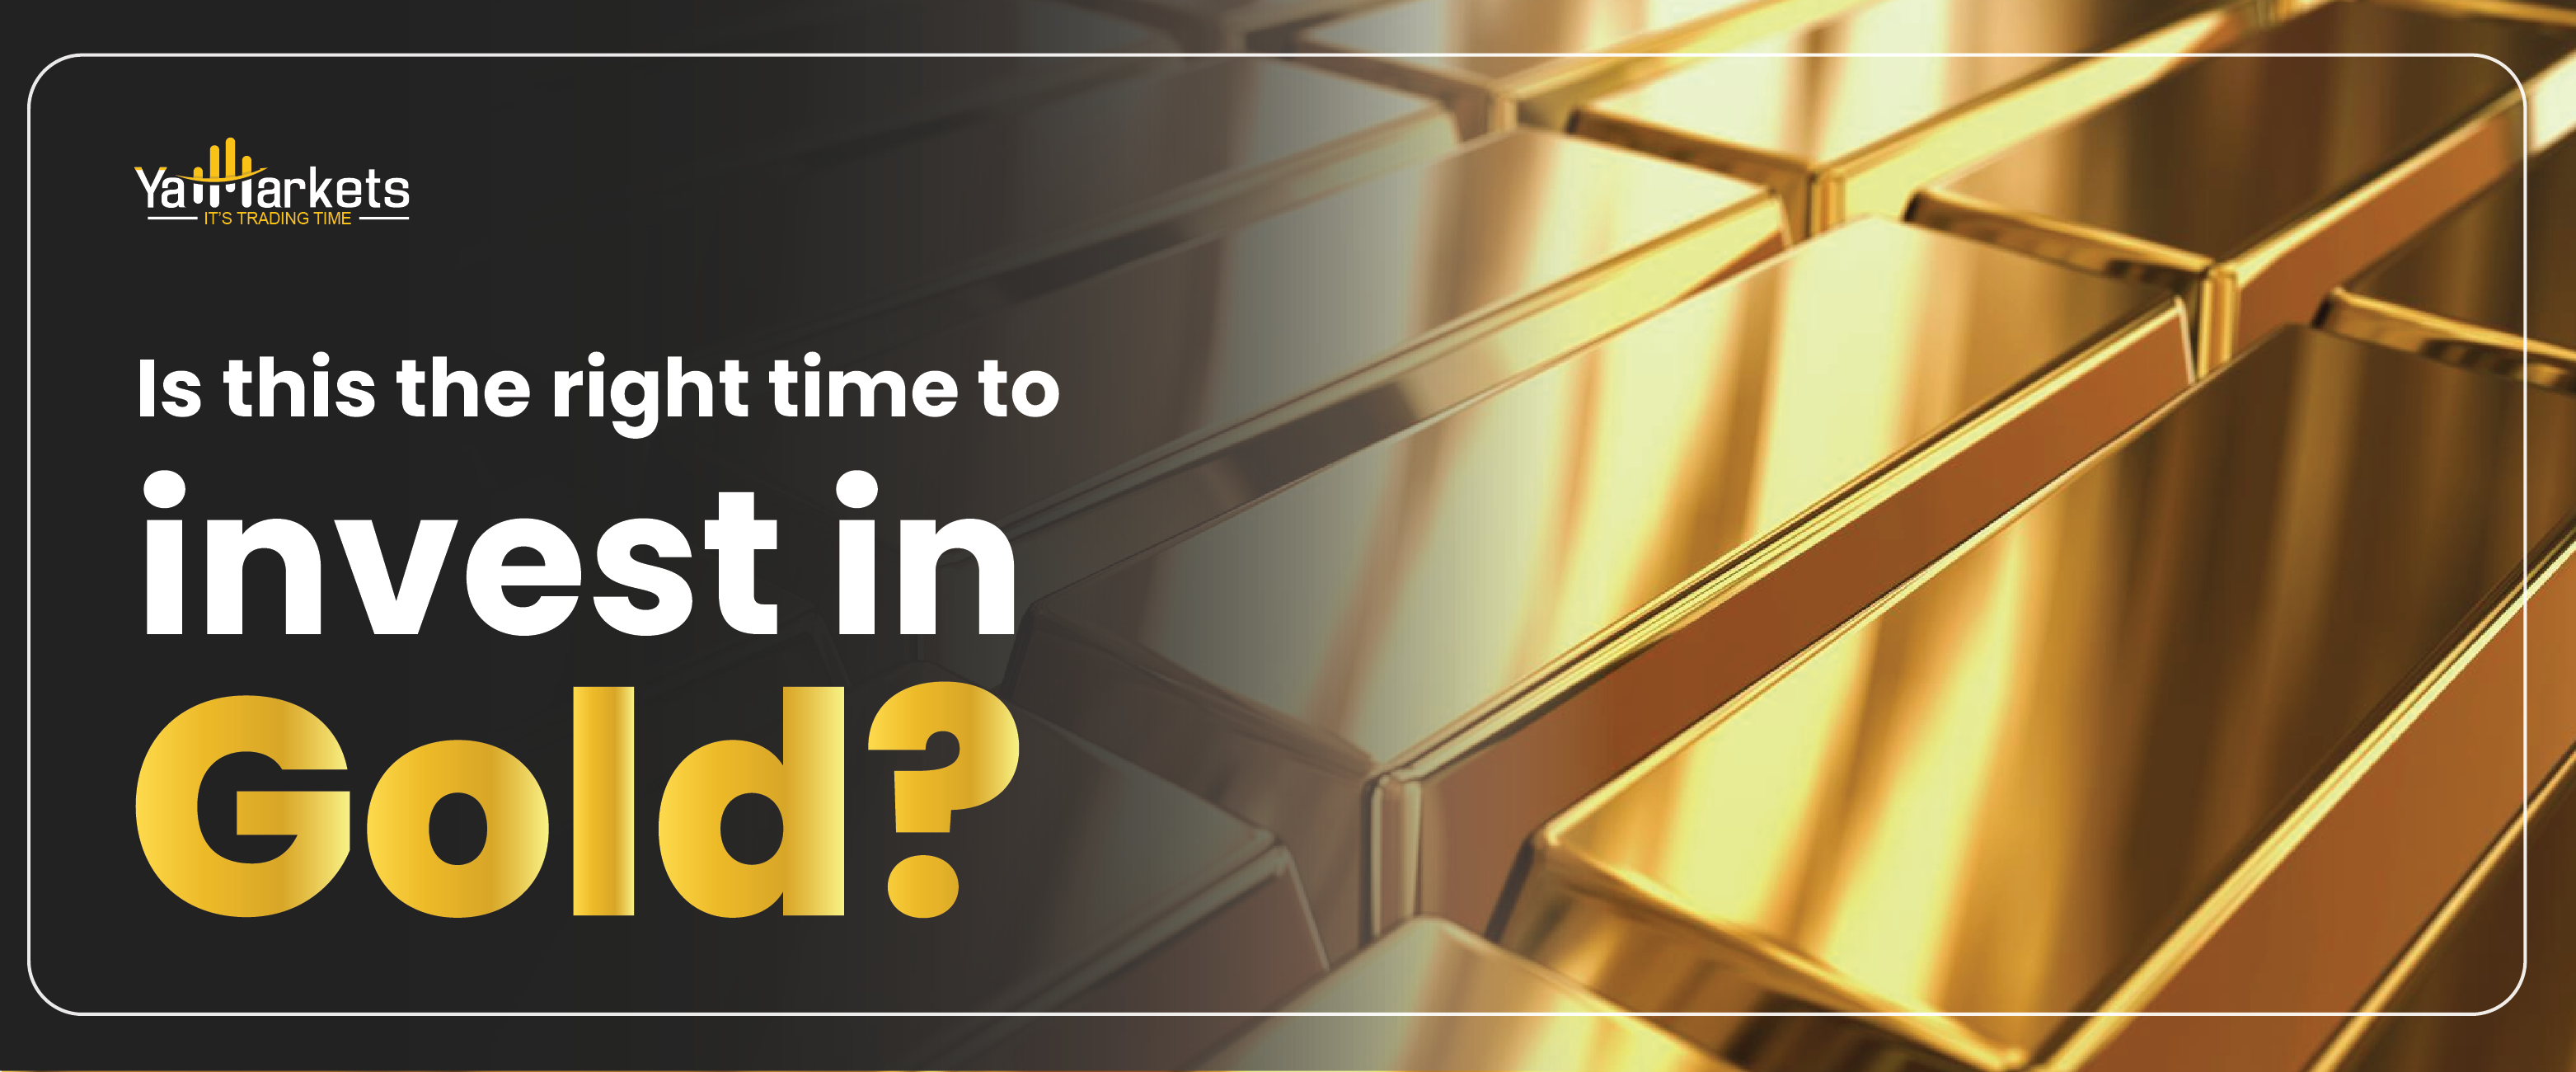 Is this the right time to invest in Gold?